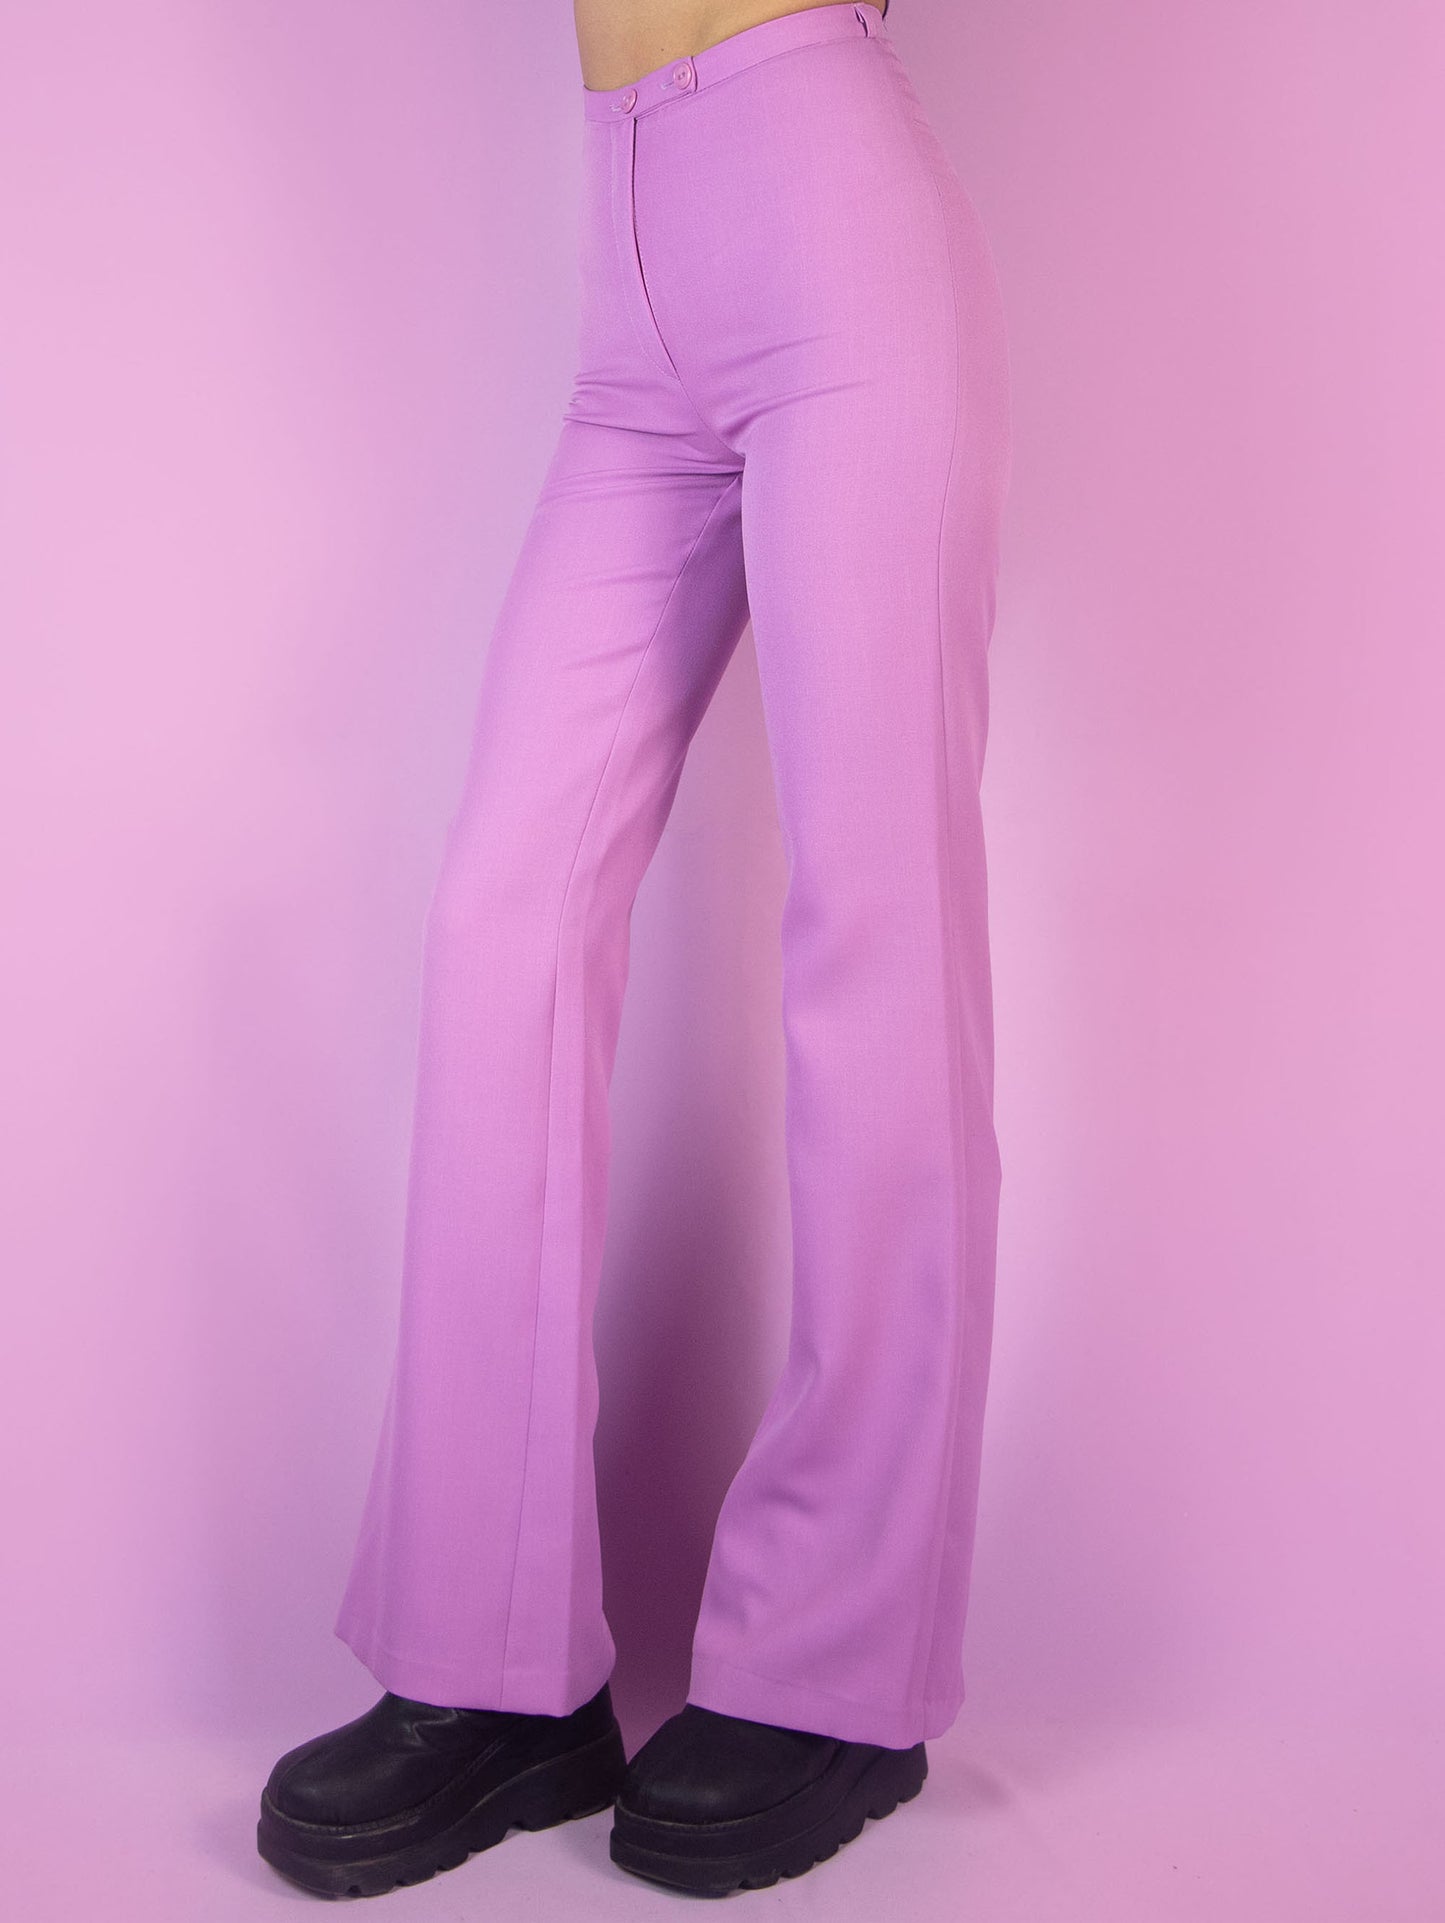 The Vintage 90s Pink Tailored Wide Pants are light pastel lilac high-waisted pants with a zipper closure and slits at the hem. Elegant evening party 1990s classic pleated trousers.